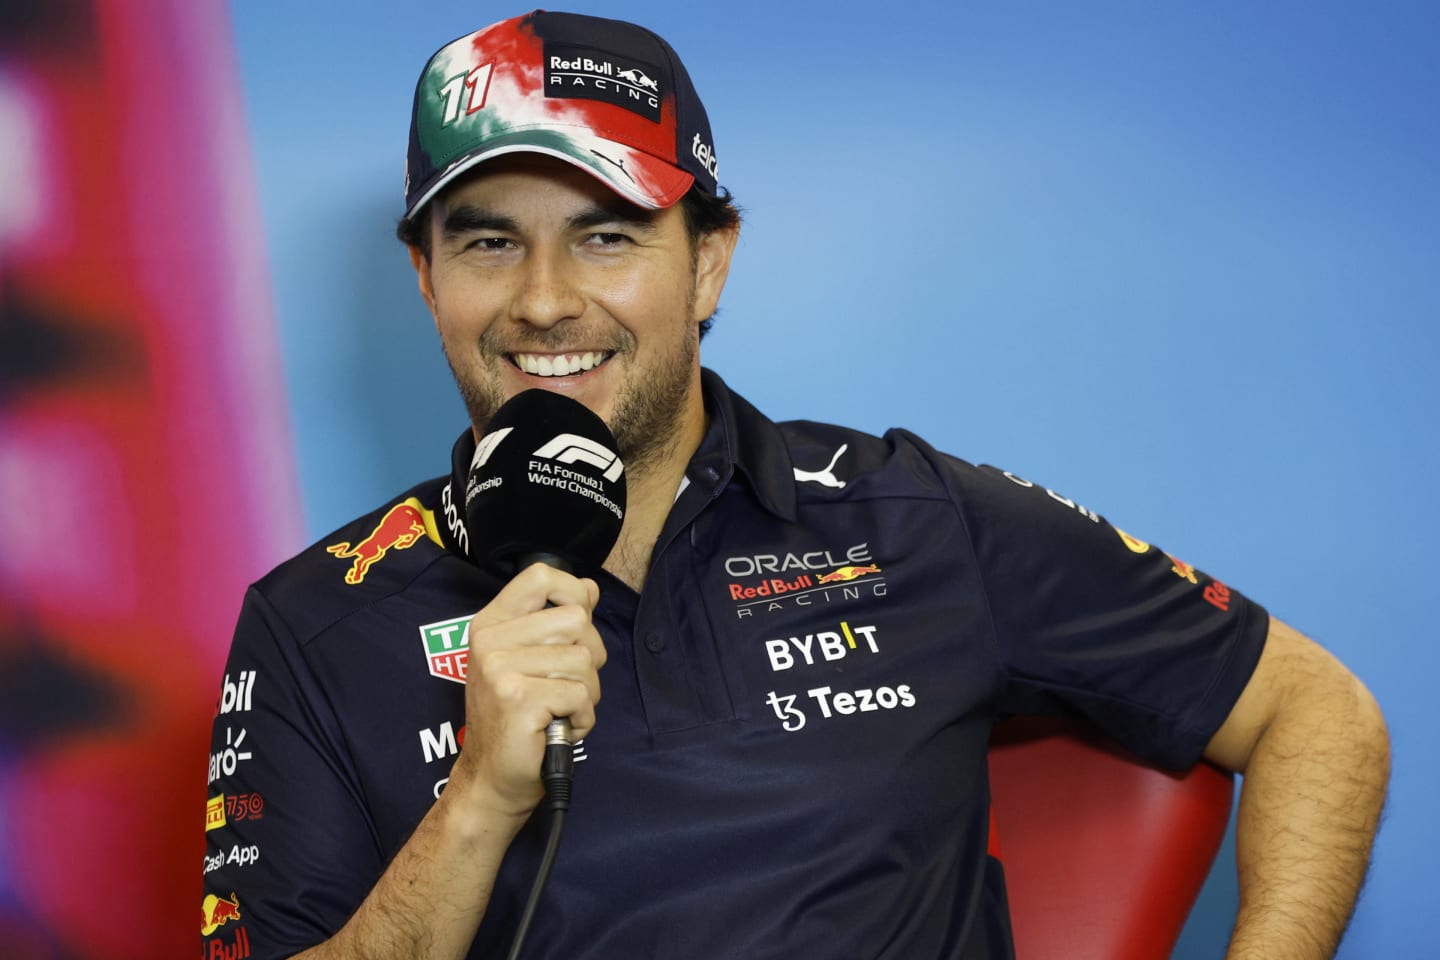 AUSTIN, TEXAS - OCTOBER 20: Sergio Perez of Mexico and Oracle Red Bull Racing attends the Drivers Press Conference during previews ahead of the F1 Grand Prix of USA at Circuit of The Americas on October 20, 2022 in Austin, Texas. (Photo by Jared C. Tilton/Getty Images)